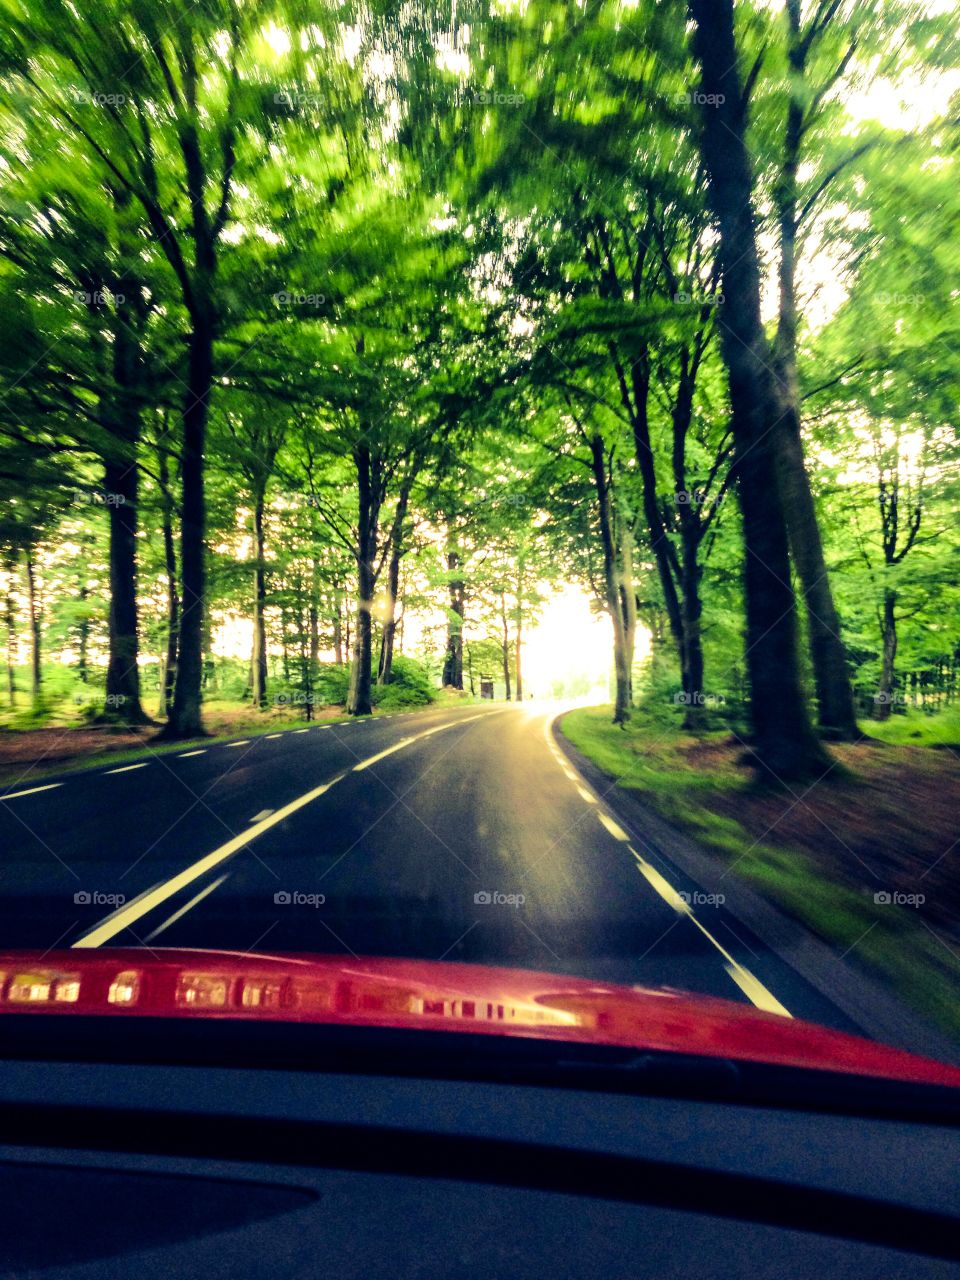 driving through the forrest